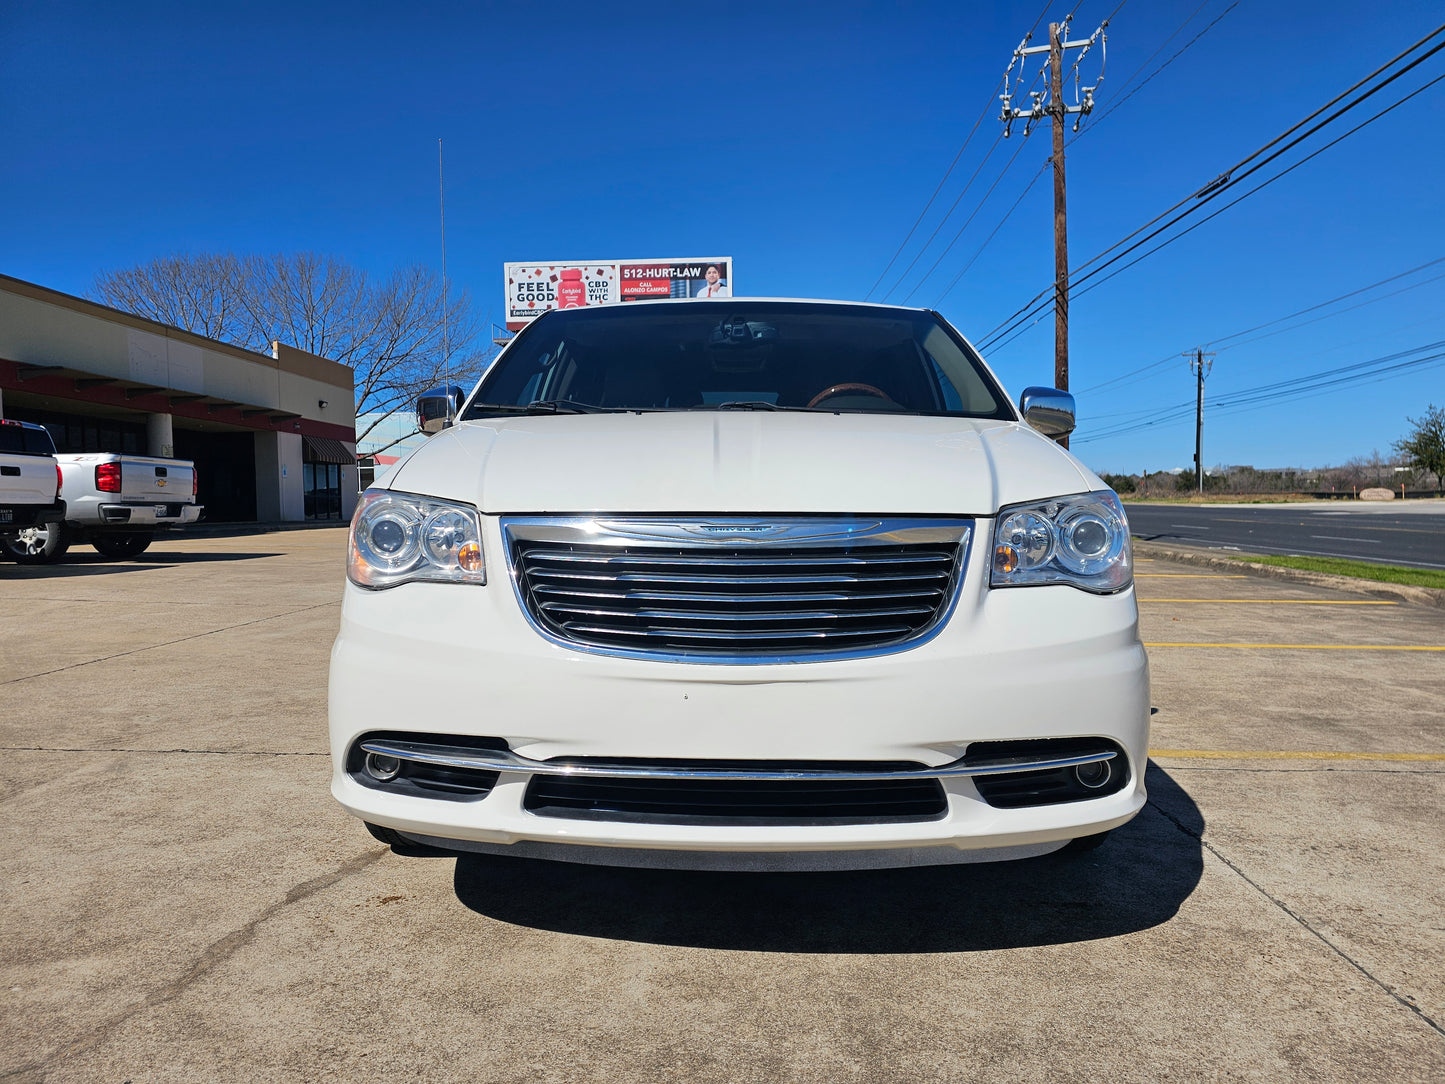 2013 Chrysler Town and Country Limited